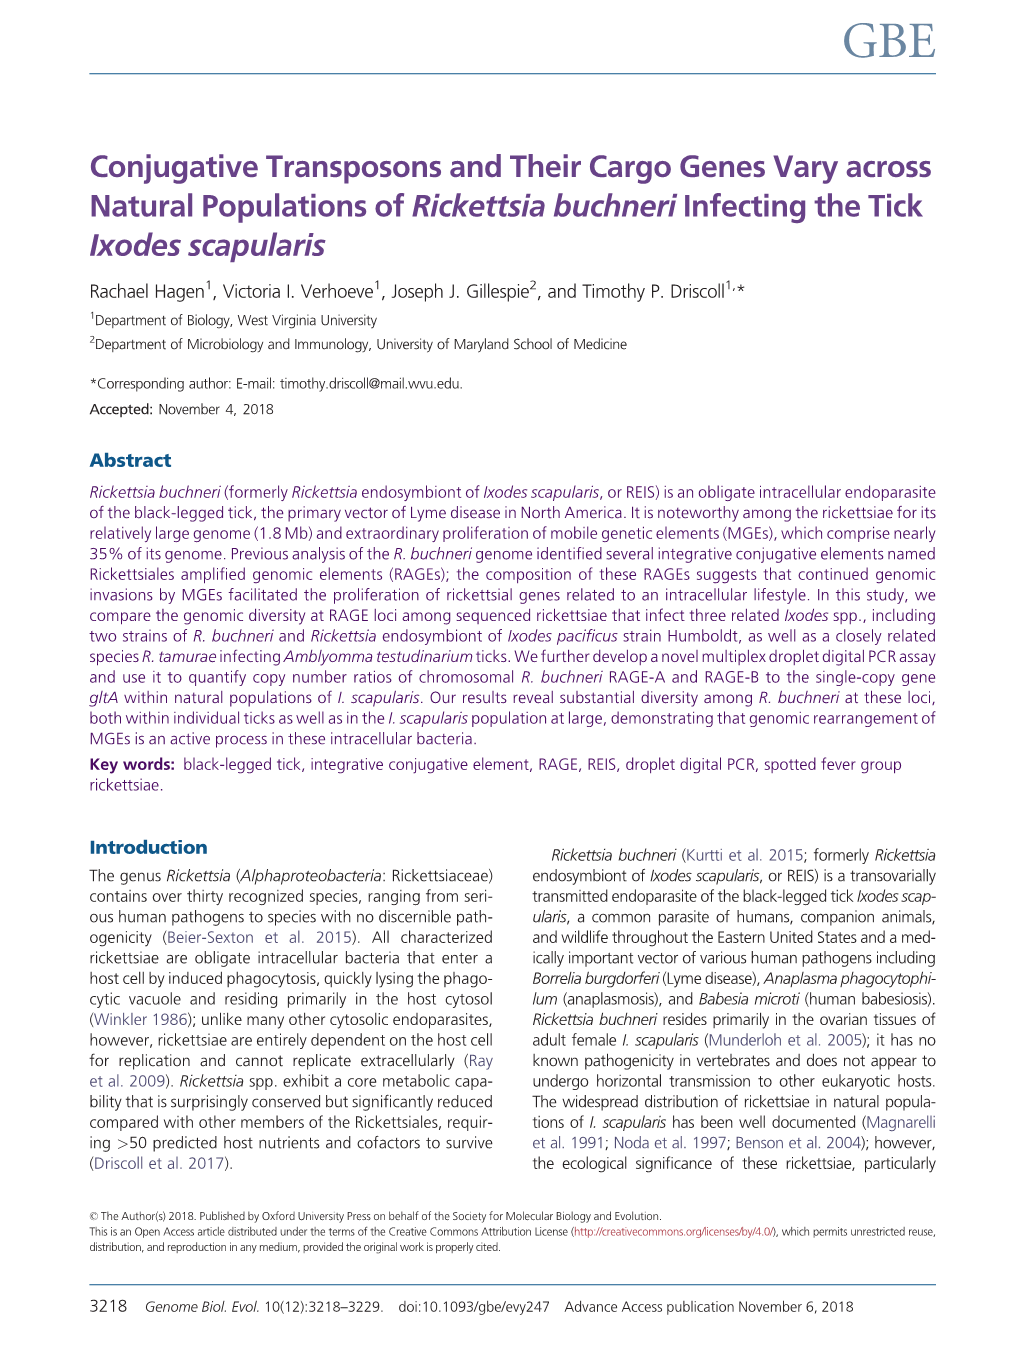 Conjugative Transposons and Their Cargo Genes Vary Across Natural Populations of Rickettsia Buchneri Infecting the Tick Ixodes Scapularis